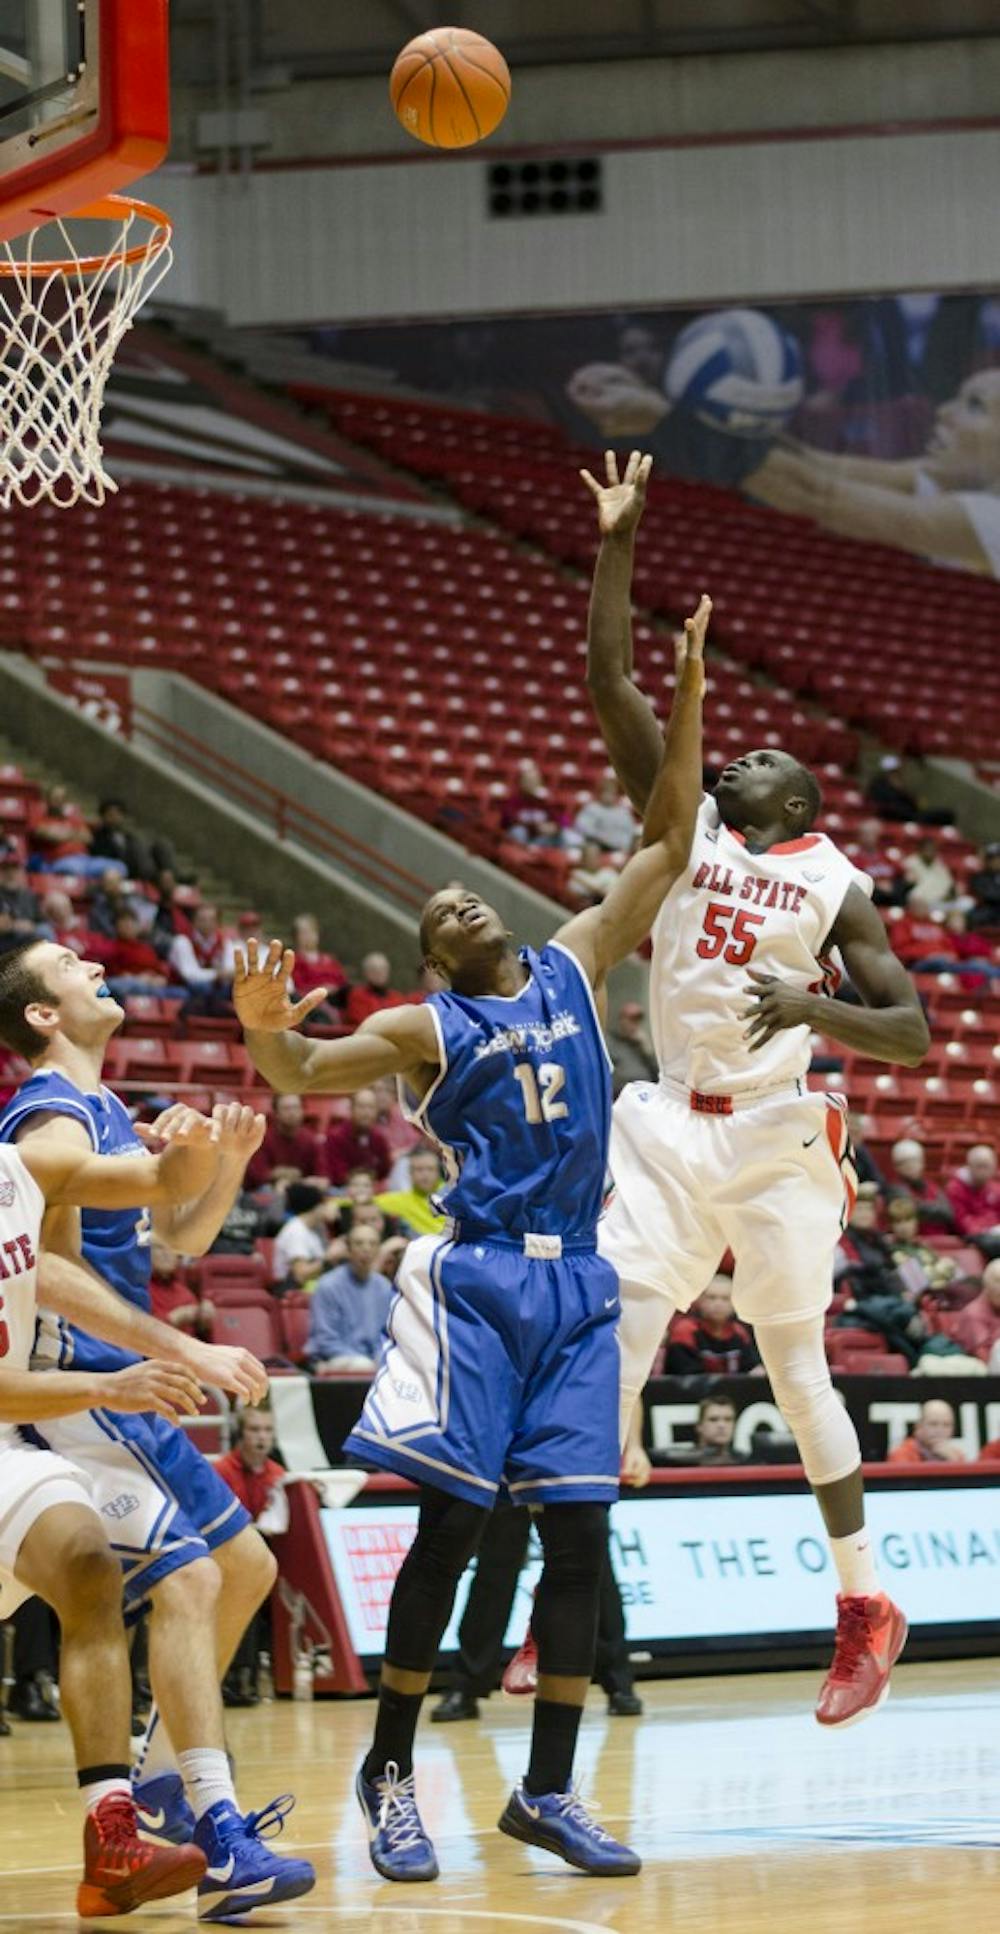 Senior center Majok Majok attempts a shot over a Buffalo player in the second half Jan. 23 at Worthen Arena. Majok had 12 points in the game. DN PHOTO BREANNA DAUGHERTY